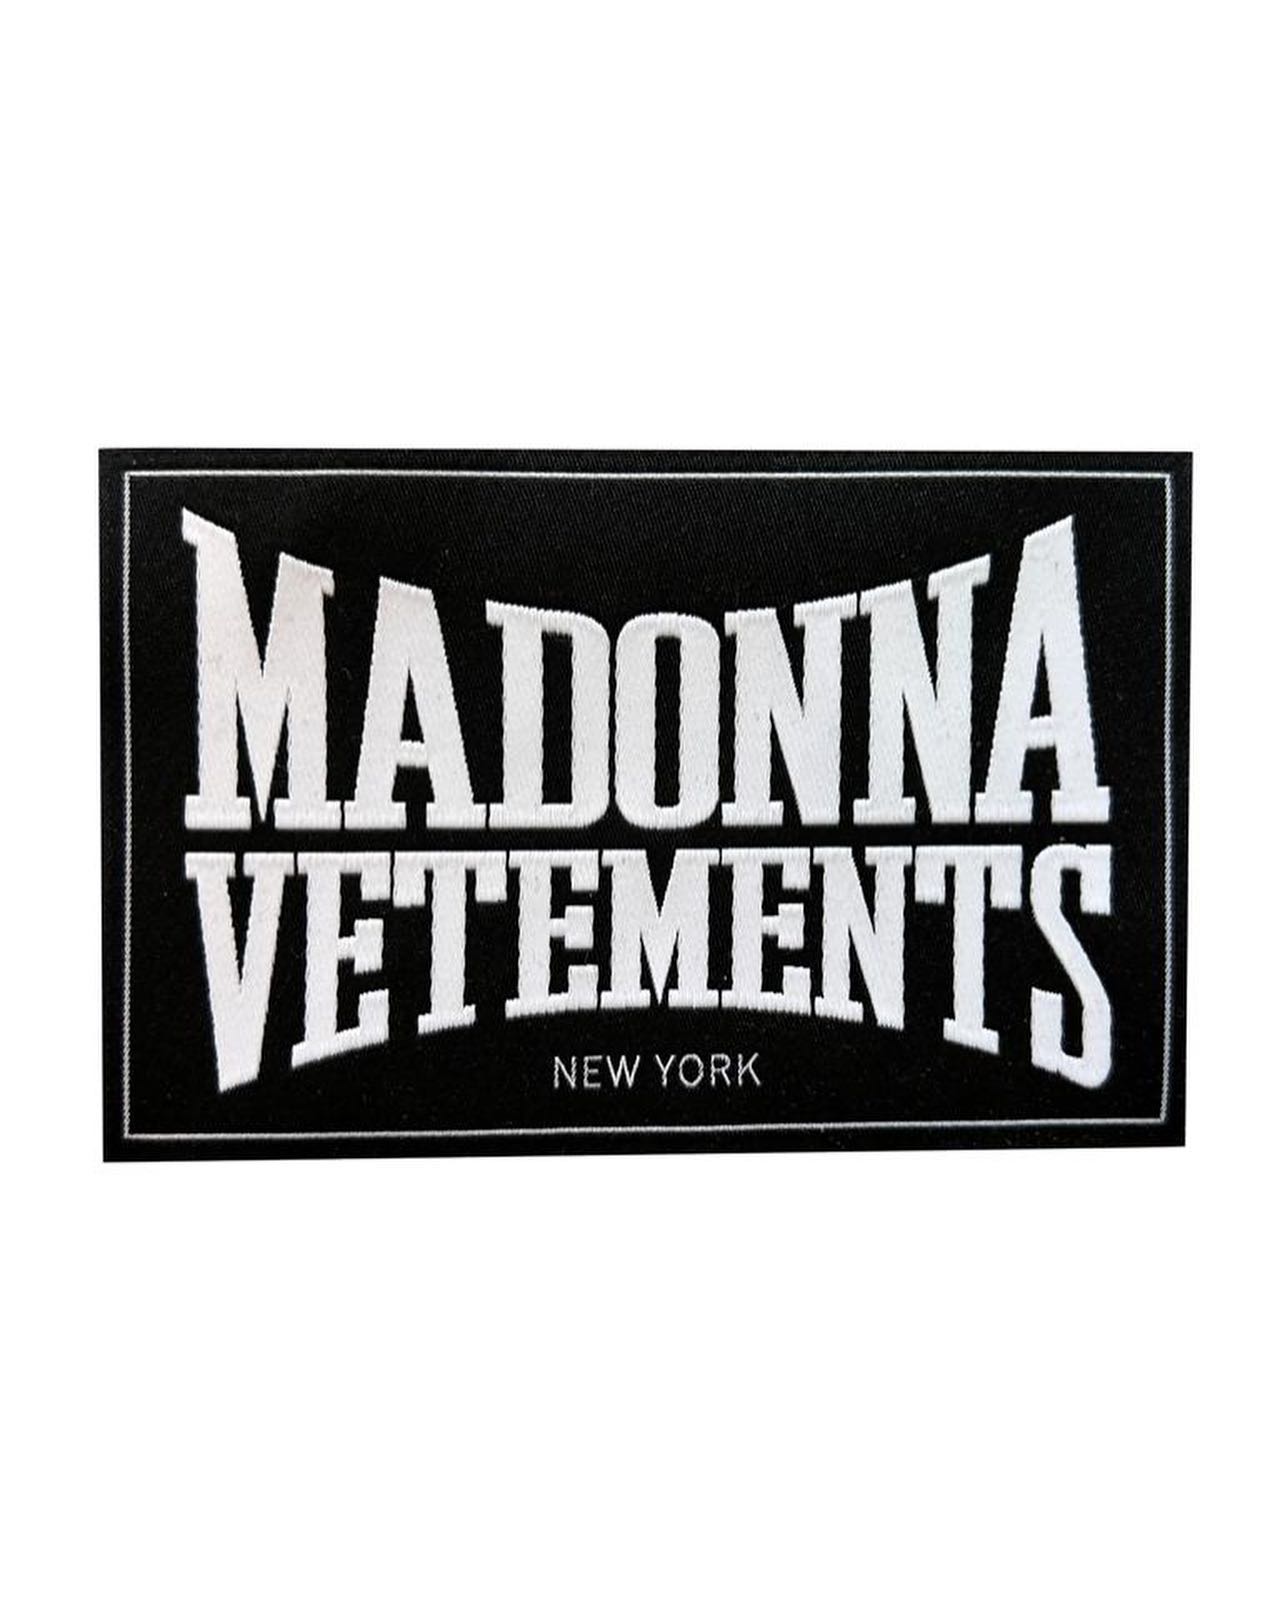 Madonna teams up with Vetements for costumes for delayed tour, Entertainment